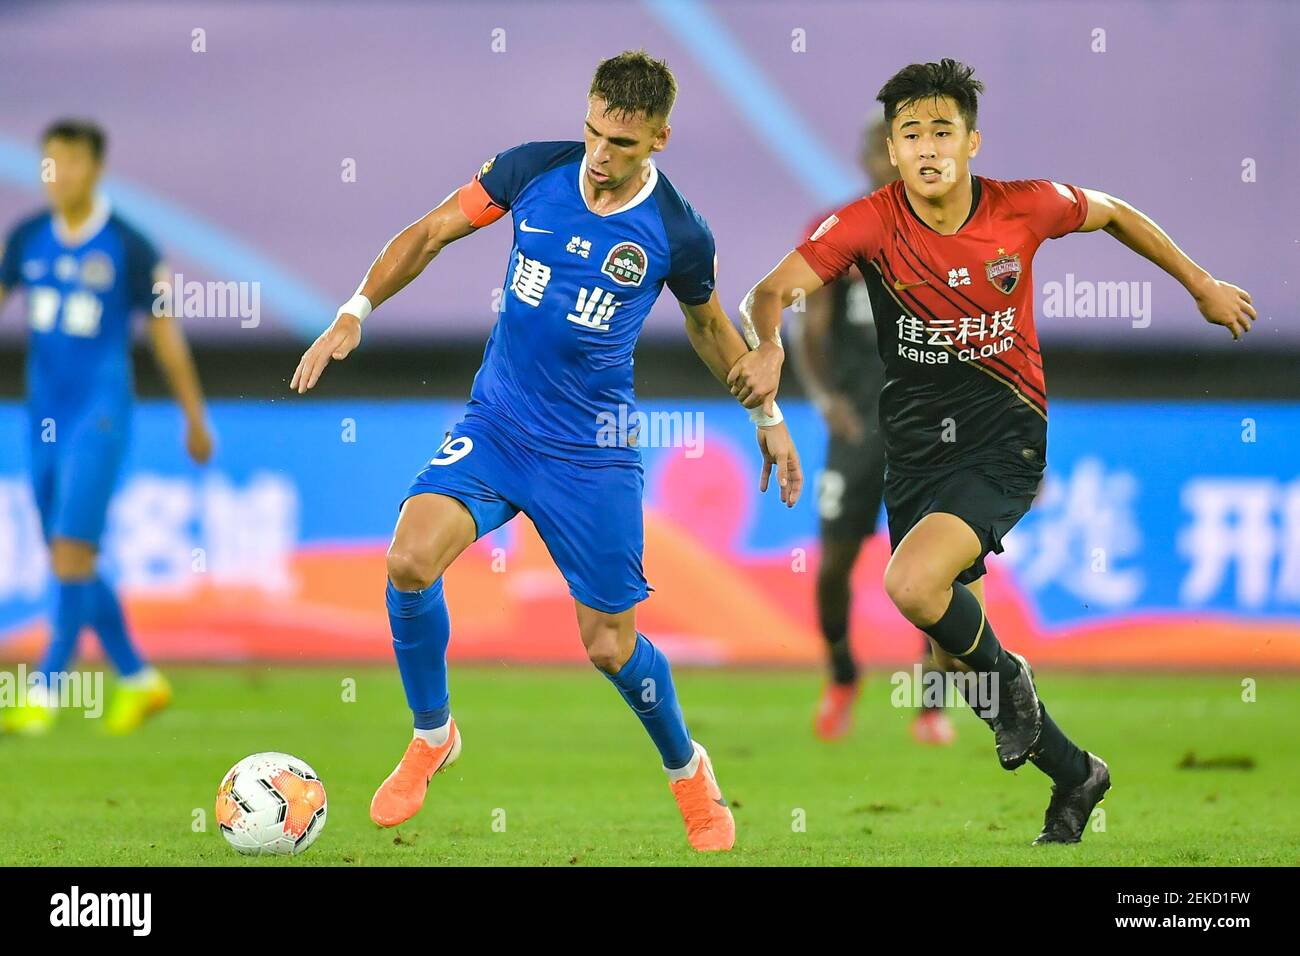 Brazilian football player Olivio da Rosa, also known as Ivo, of Henan Jianye F.C., left, protects the ball during the fourth-round match of 2020 Chinese Super League (CSL) against Shenzhen F.C., Dalian city, northeast China's Liaoning province, 10 August 2020. Shenzhen F.C. was defeated by Henan Jianye F.C. with 1-2. Stock Photo